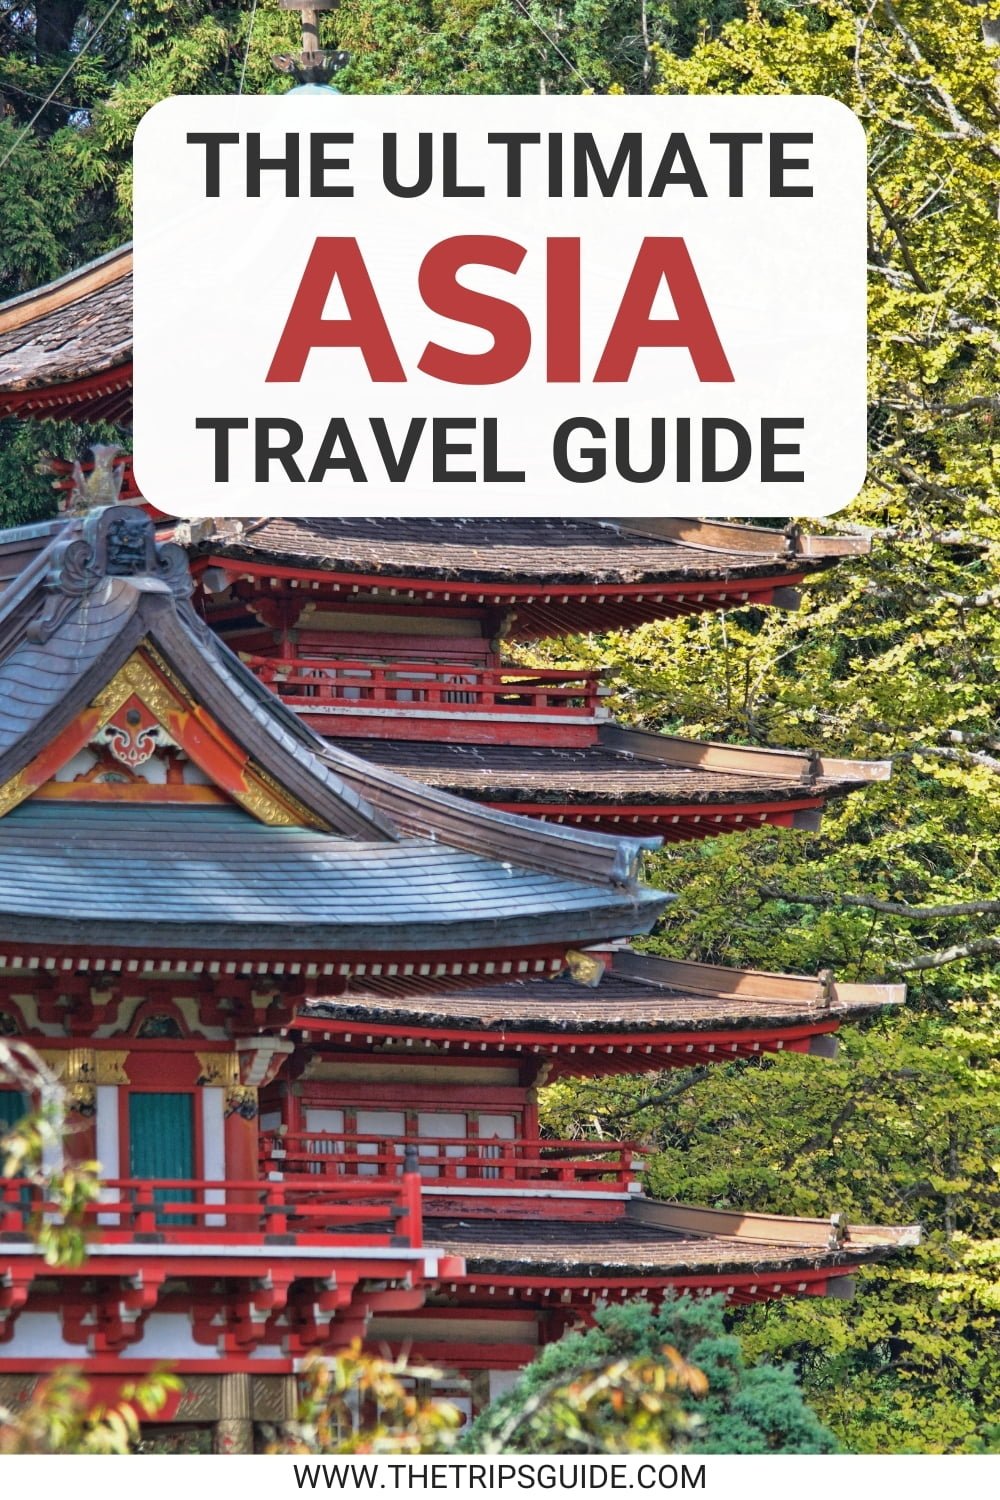 ASIA TRAVEL GUIDE